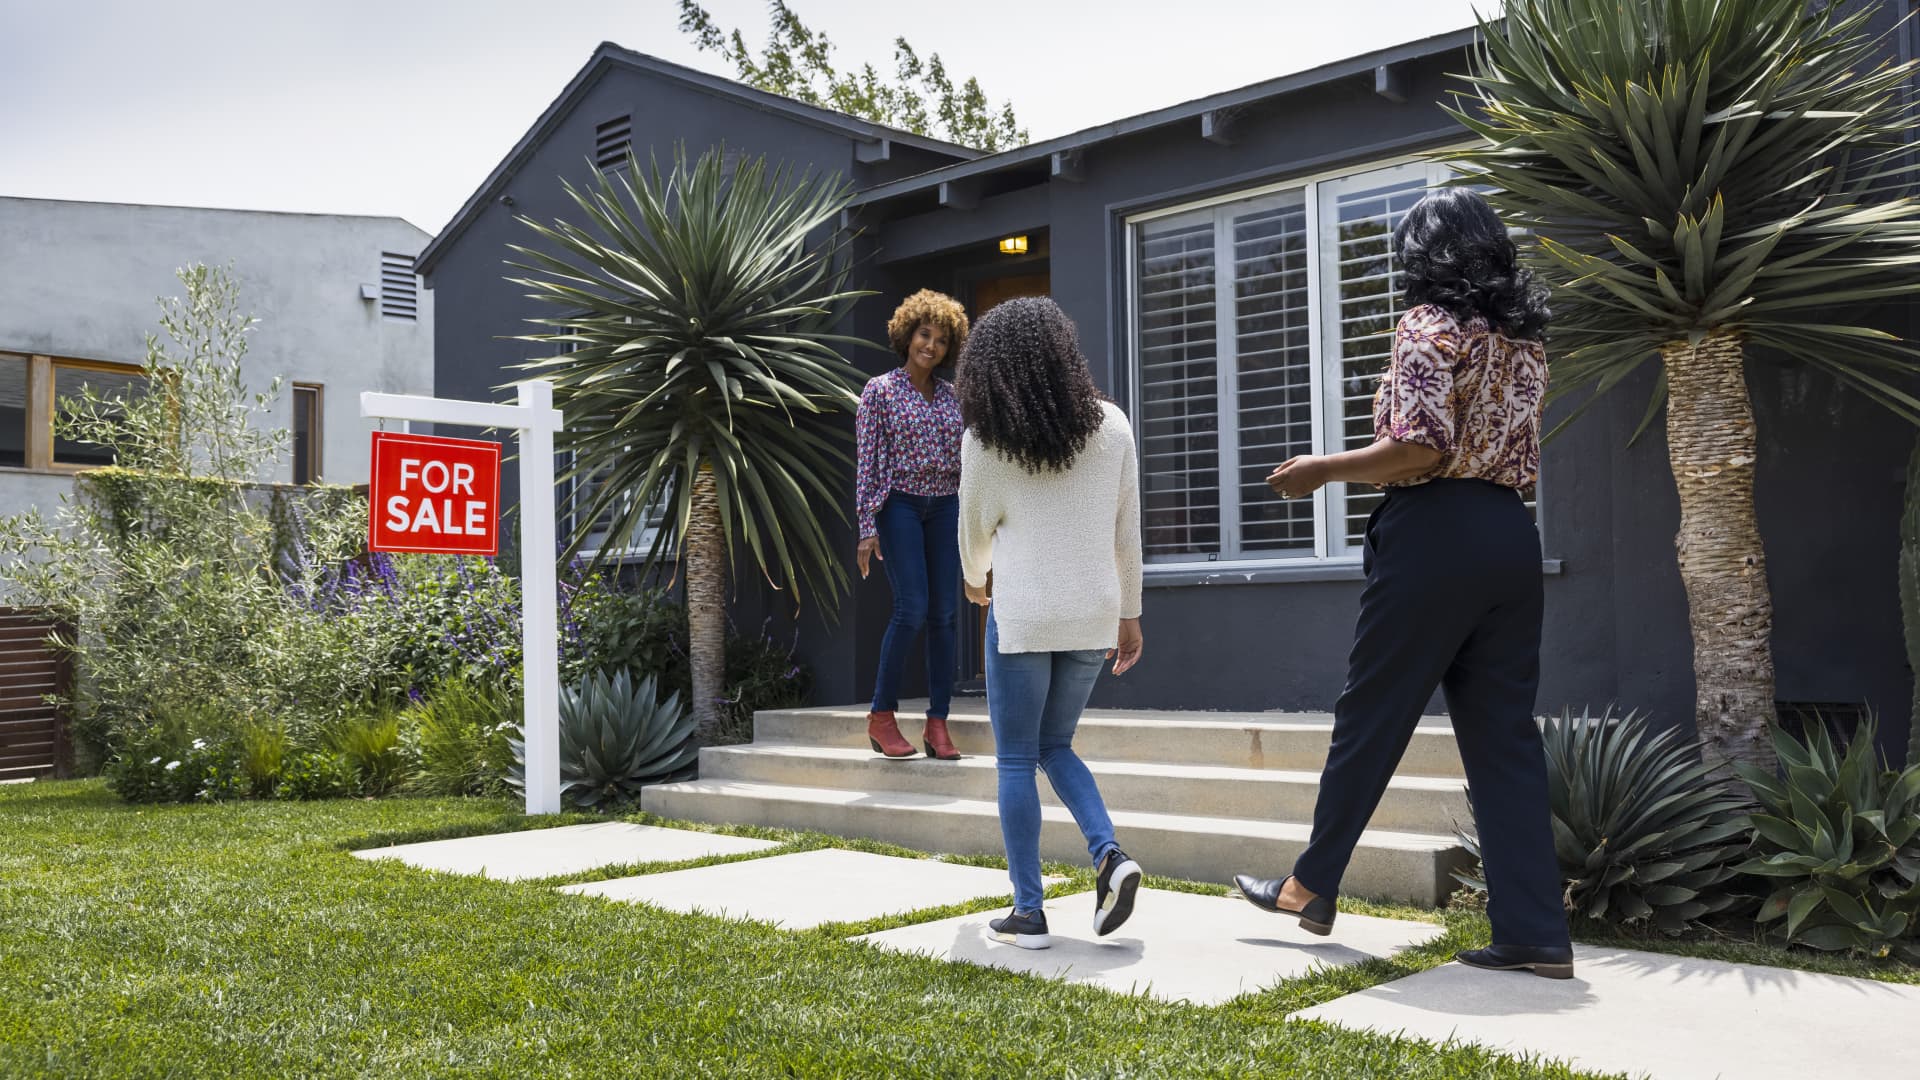 Wealth manager: Buying a home is 'usually a terrible investment'—here's why